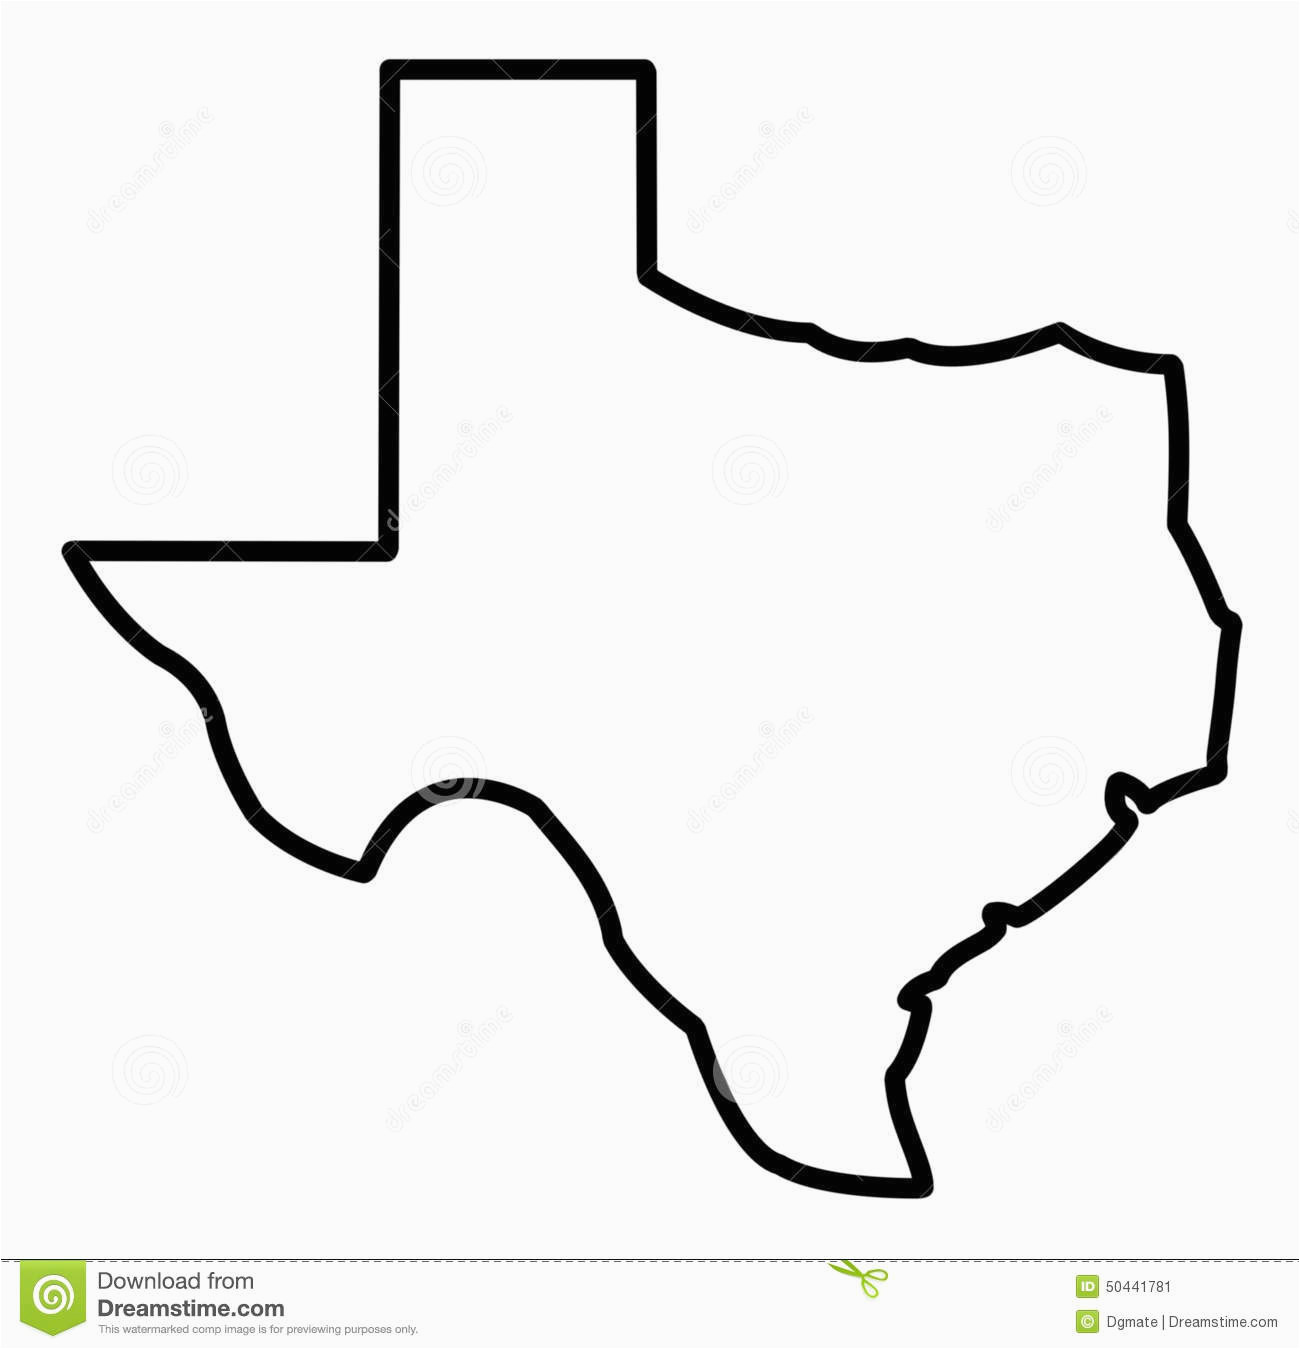 blank-map-of-texas-time-zones-map-world